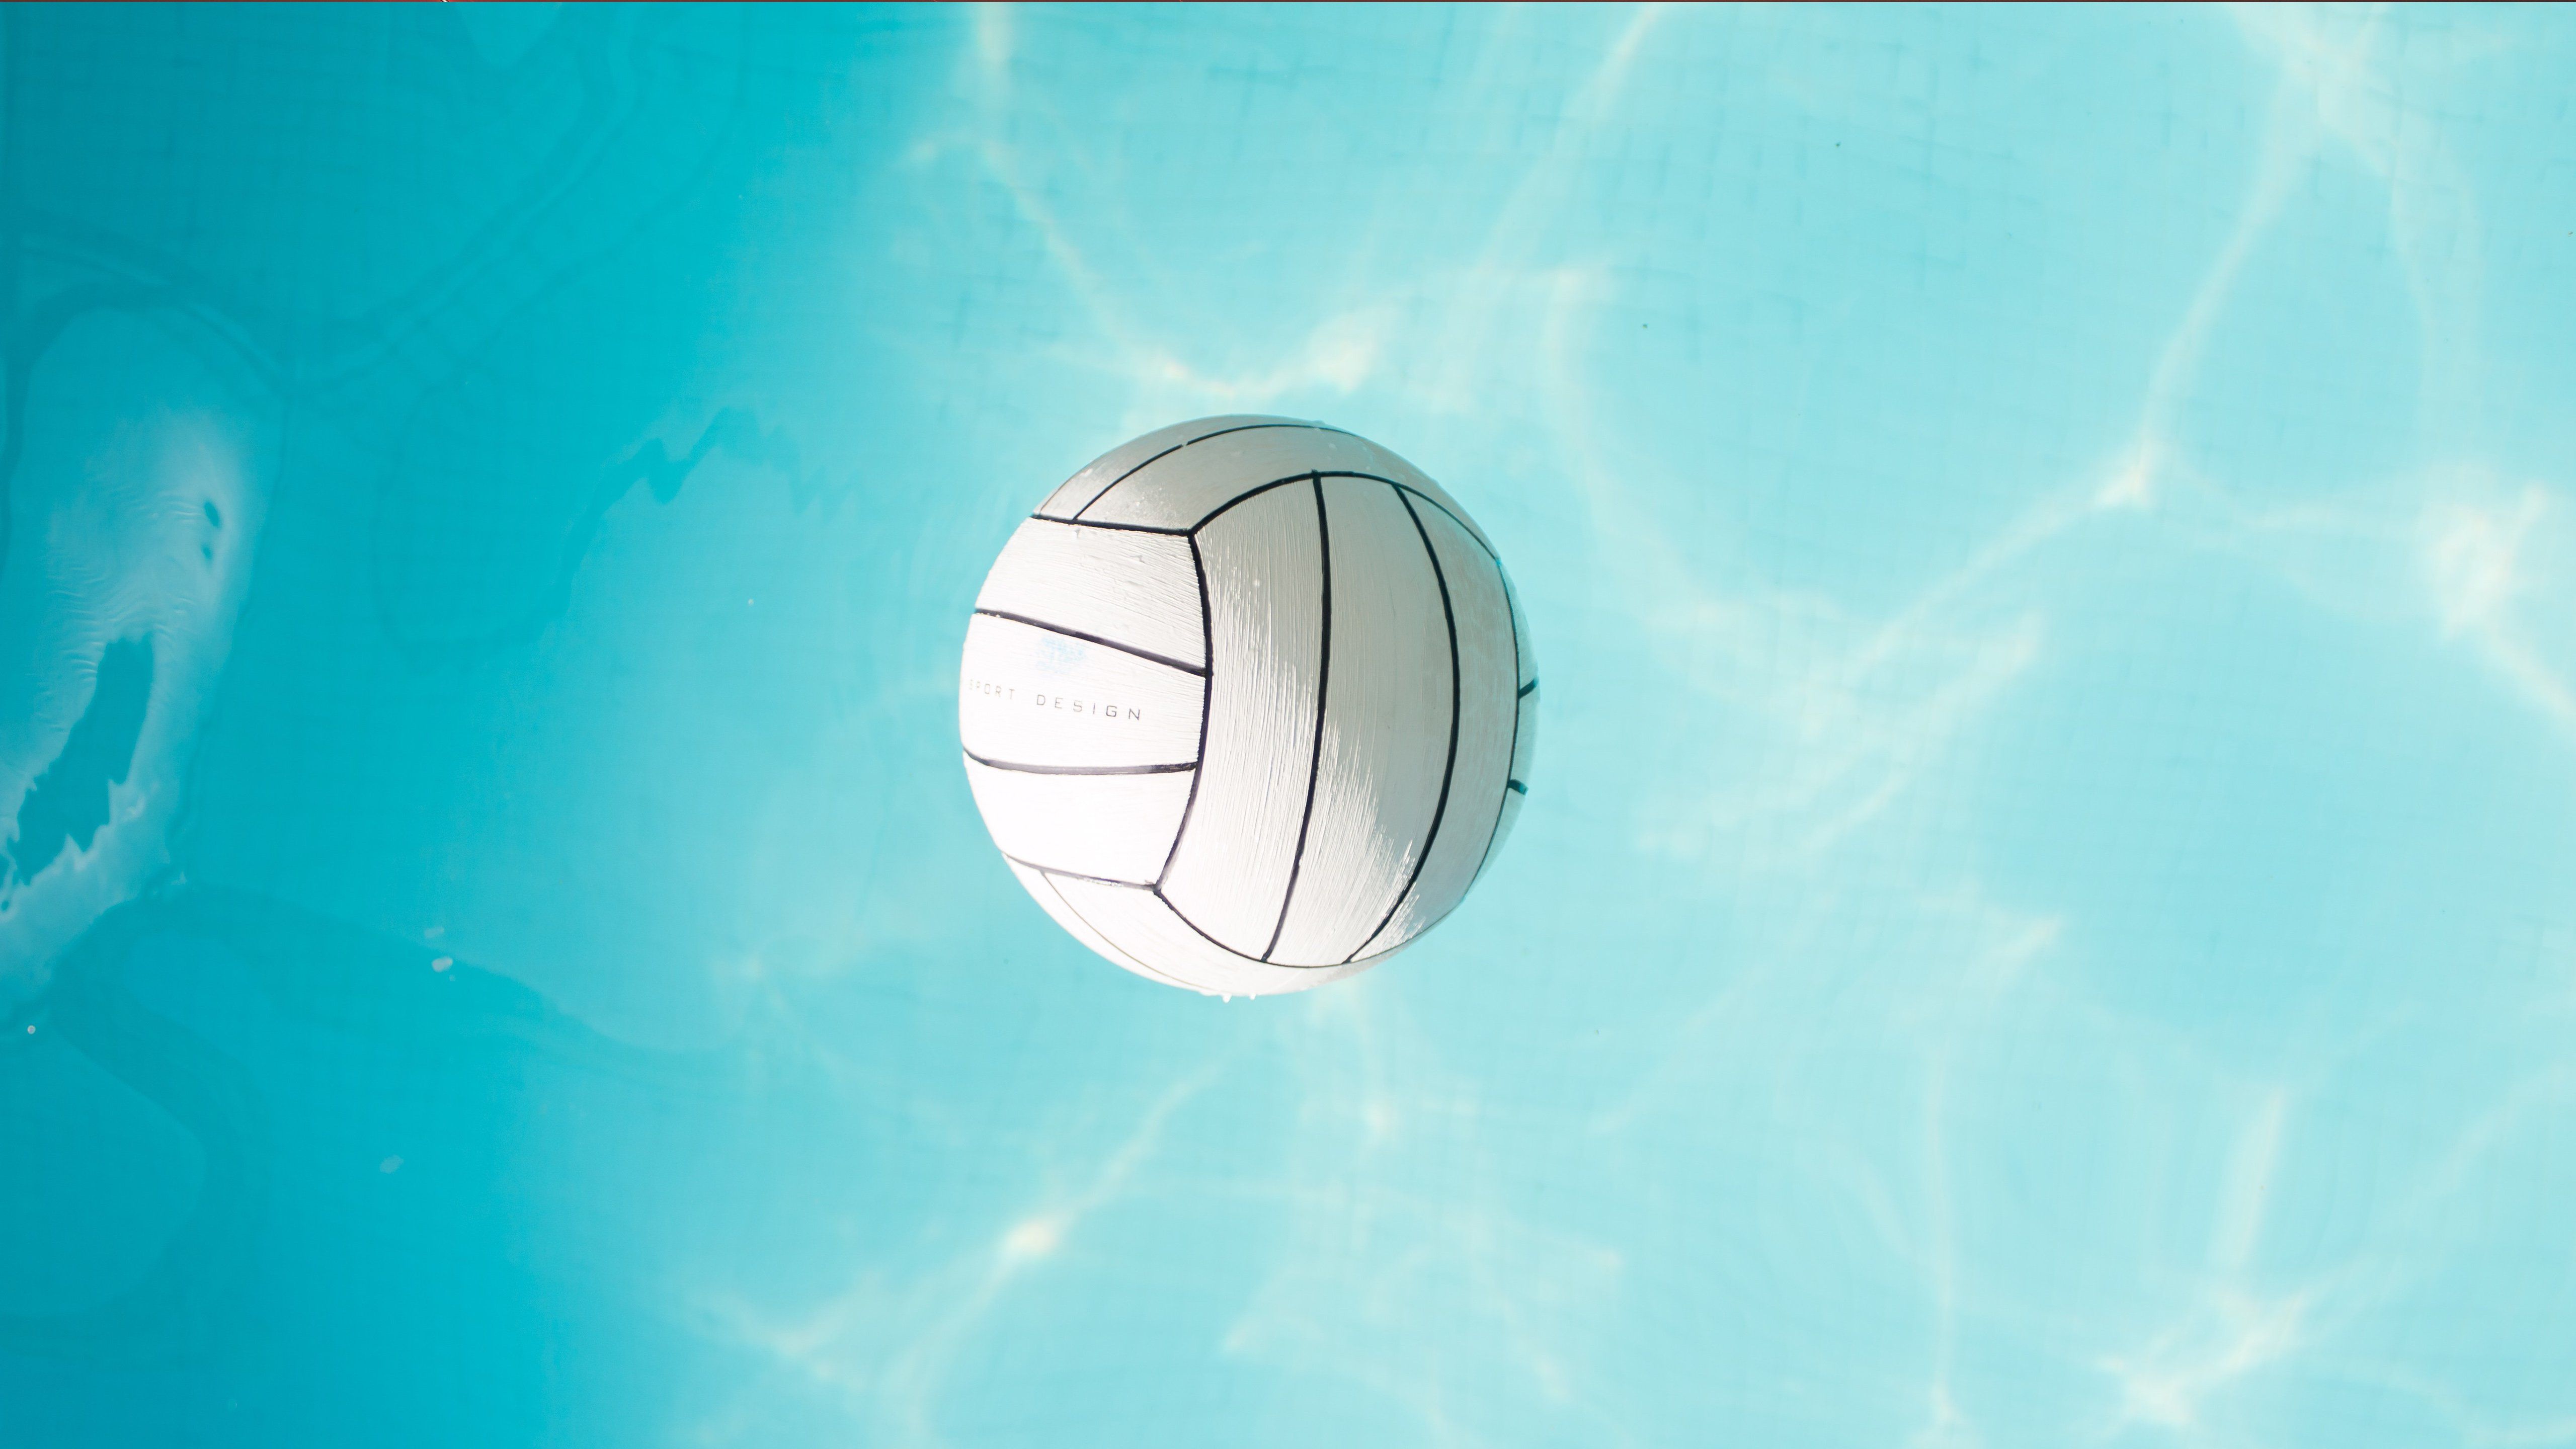 Volleyball Laptop Wallpaper Free Volleyball Laptop Background